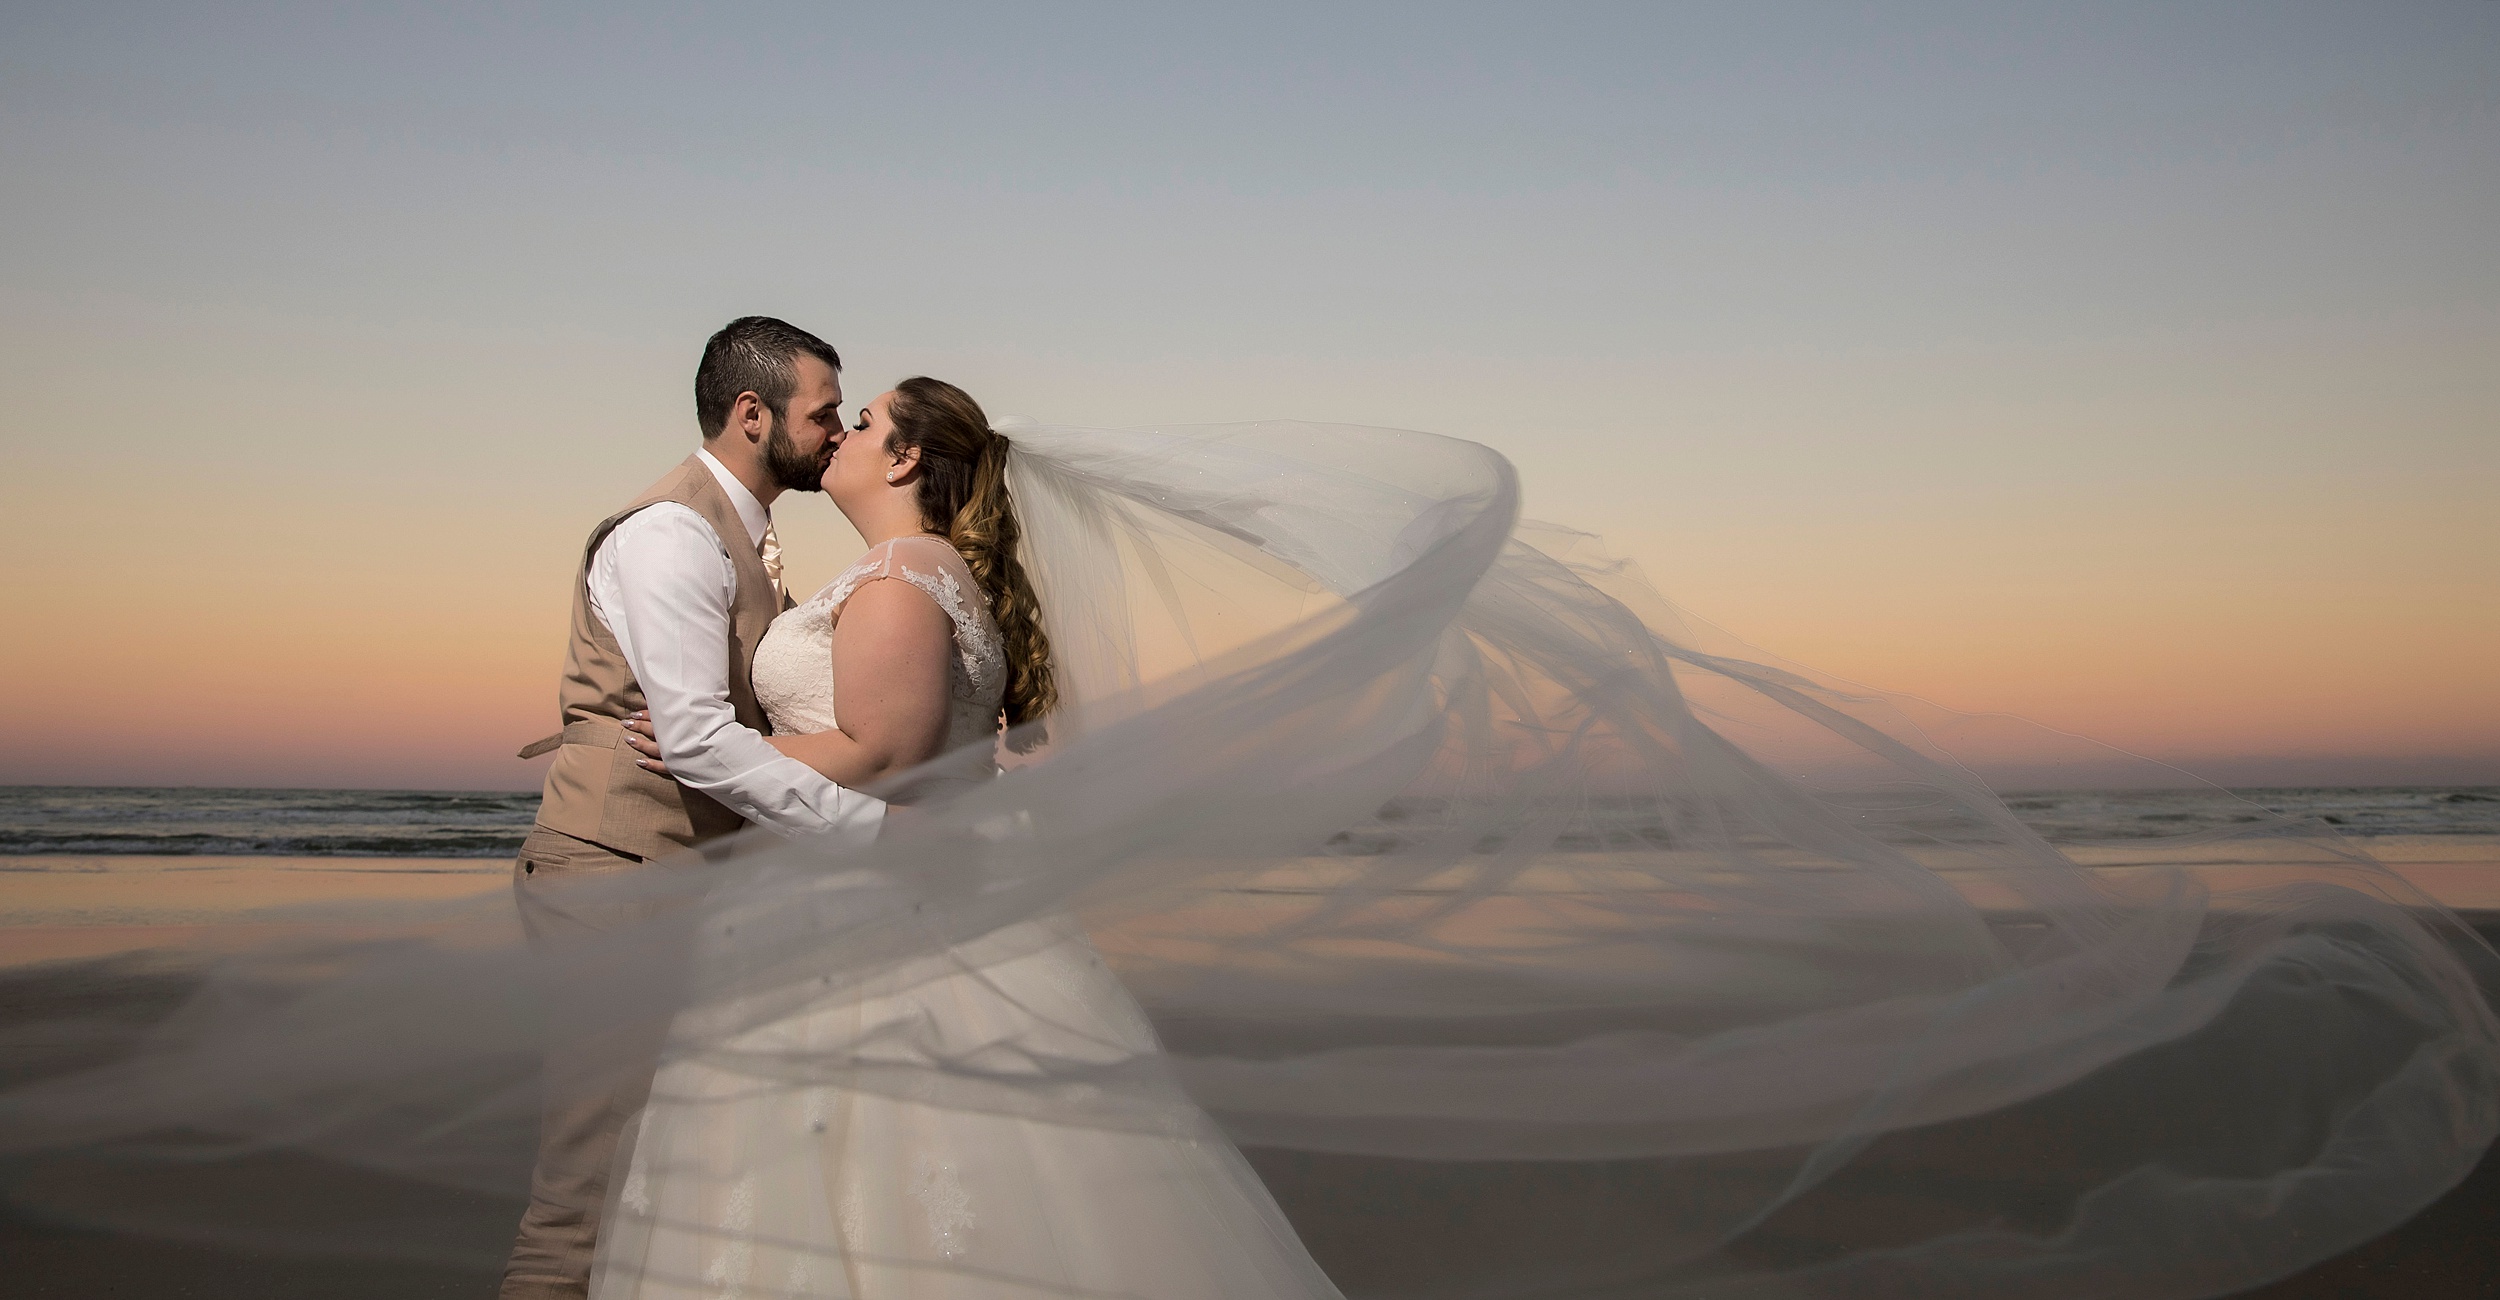 Newlyweds kiss at sunset on the beach as the veil flows in the wind around them